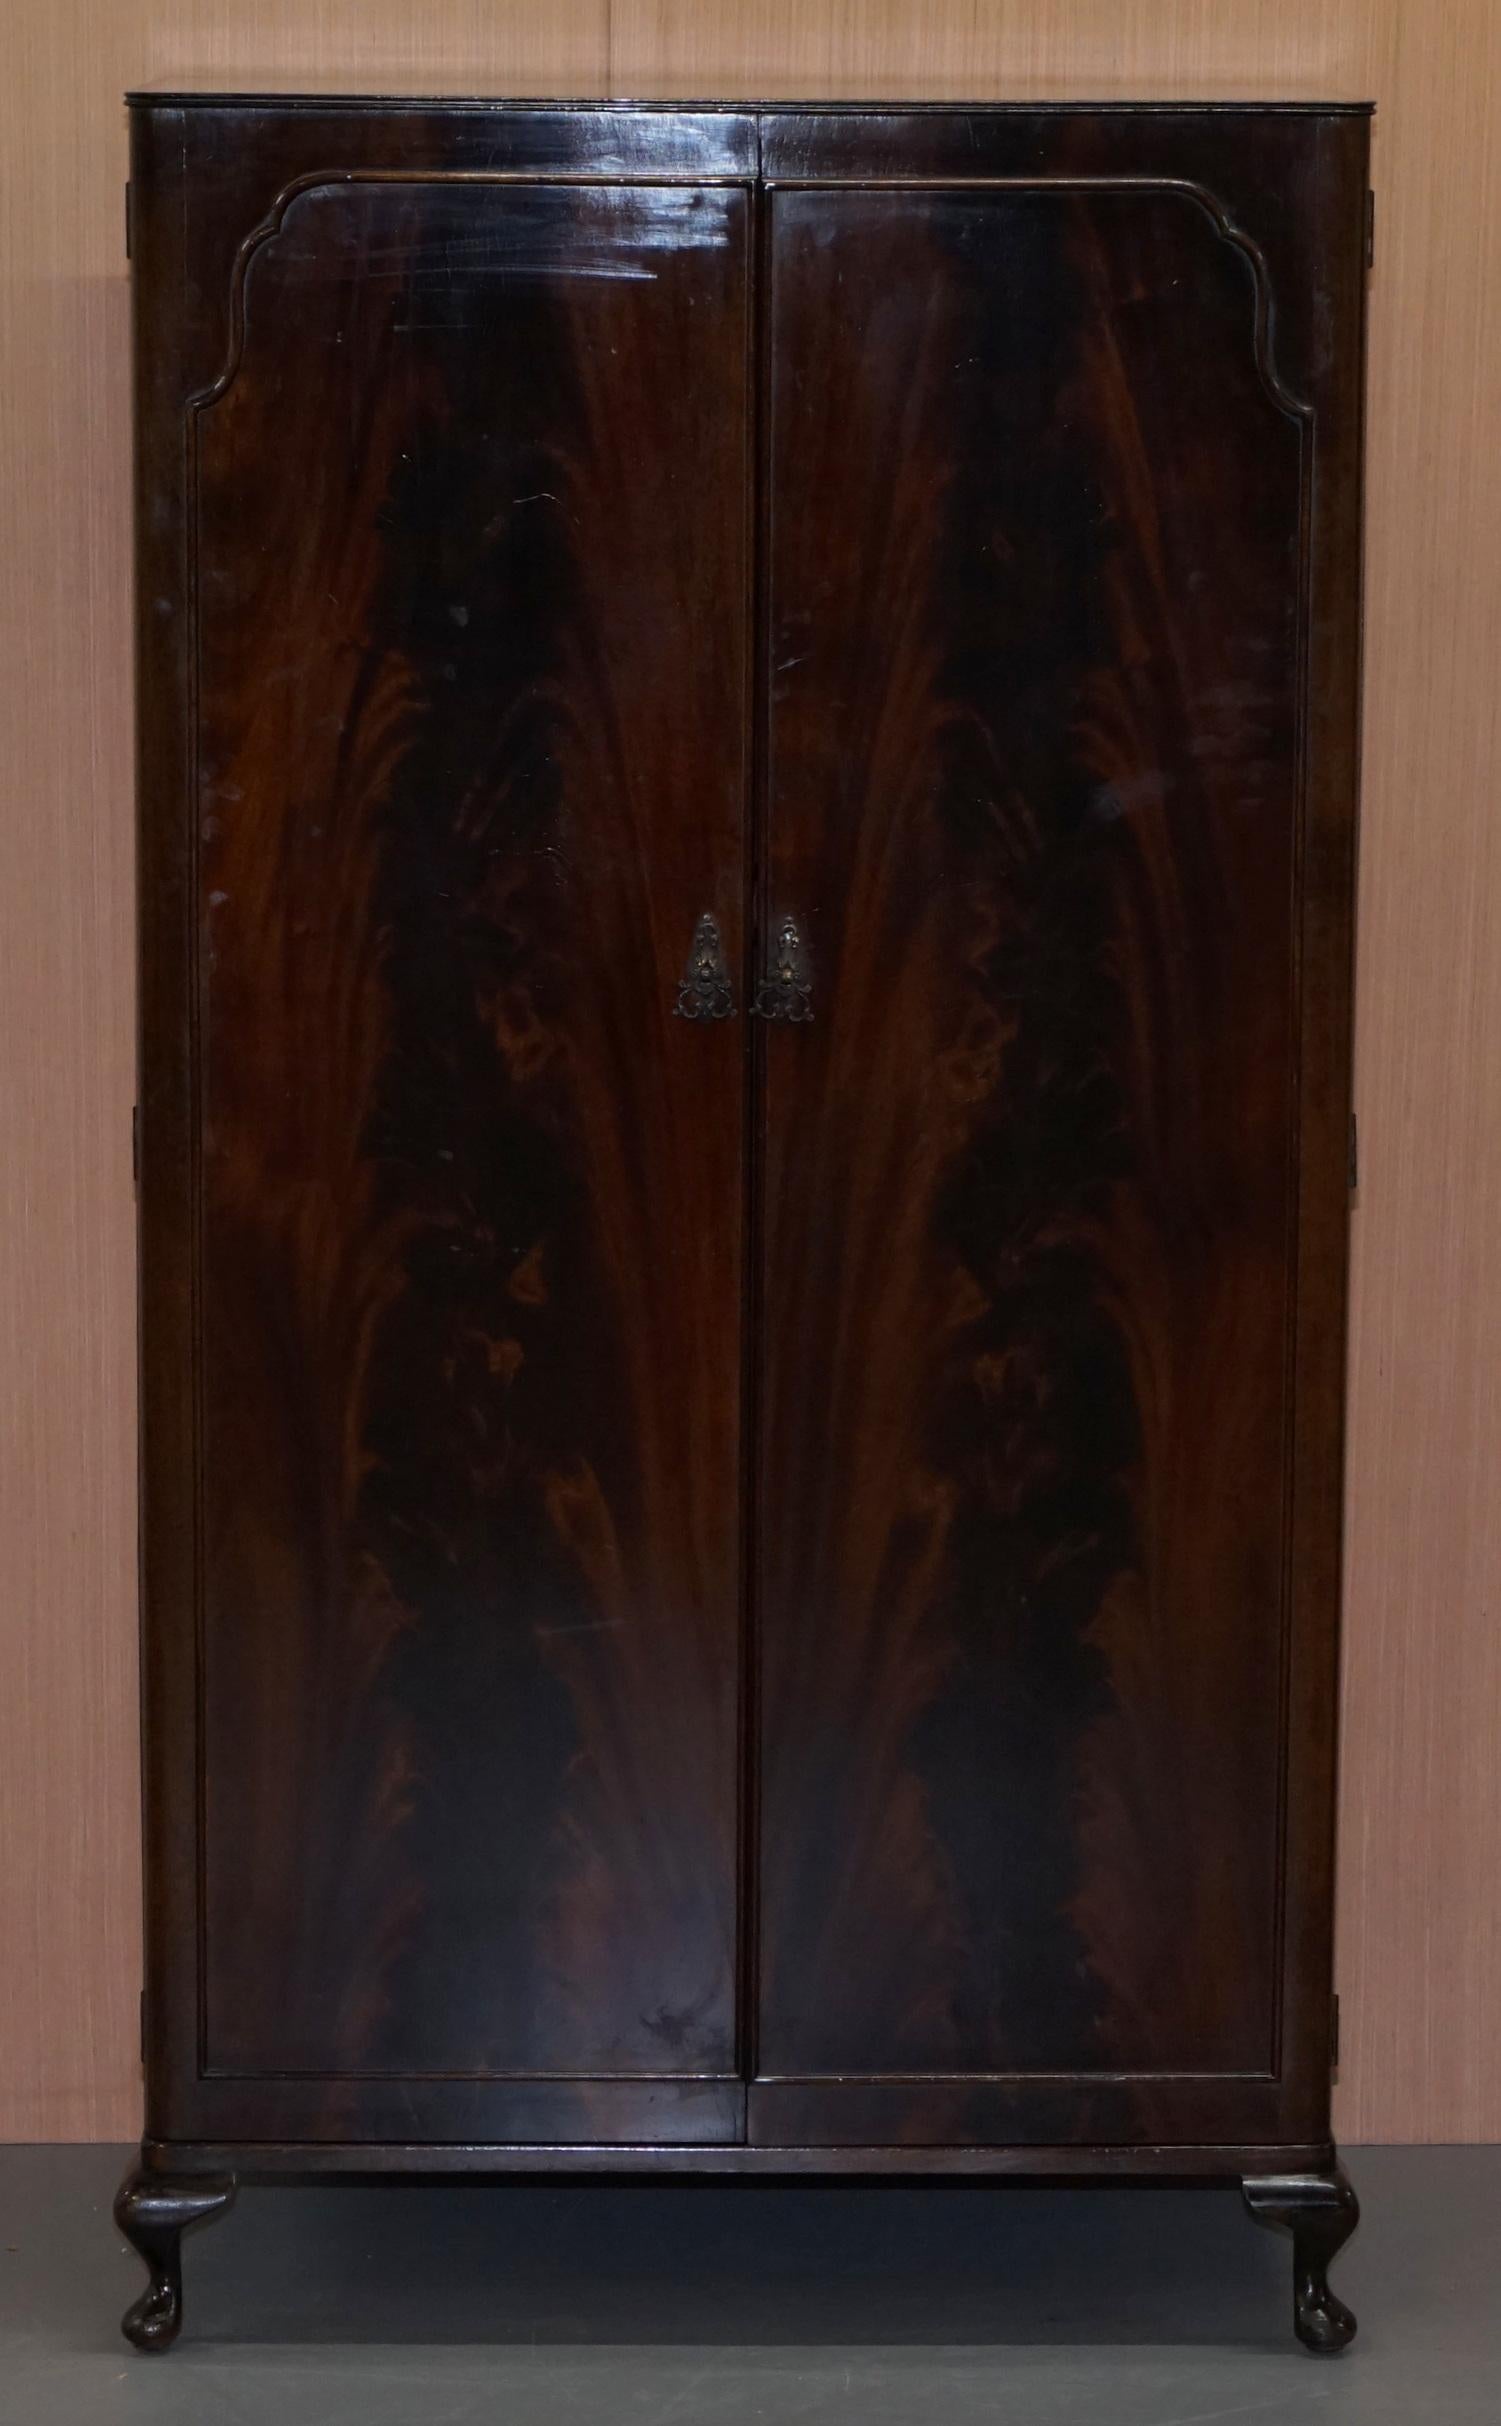 We are delighted to offer for sale this stunning Beithcraft Scotland flamed mahogany wardrobe which is part of a suite

In terms of the condition we have cleaned waxed and polish it from top to bottom, there will be normal age related patina marks